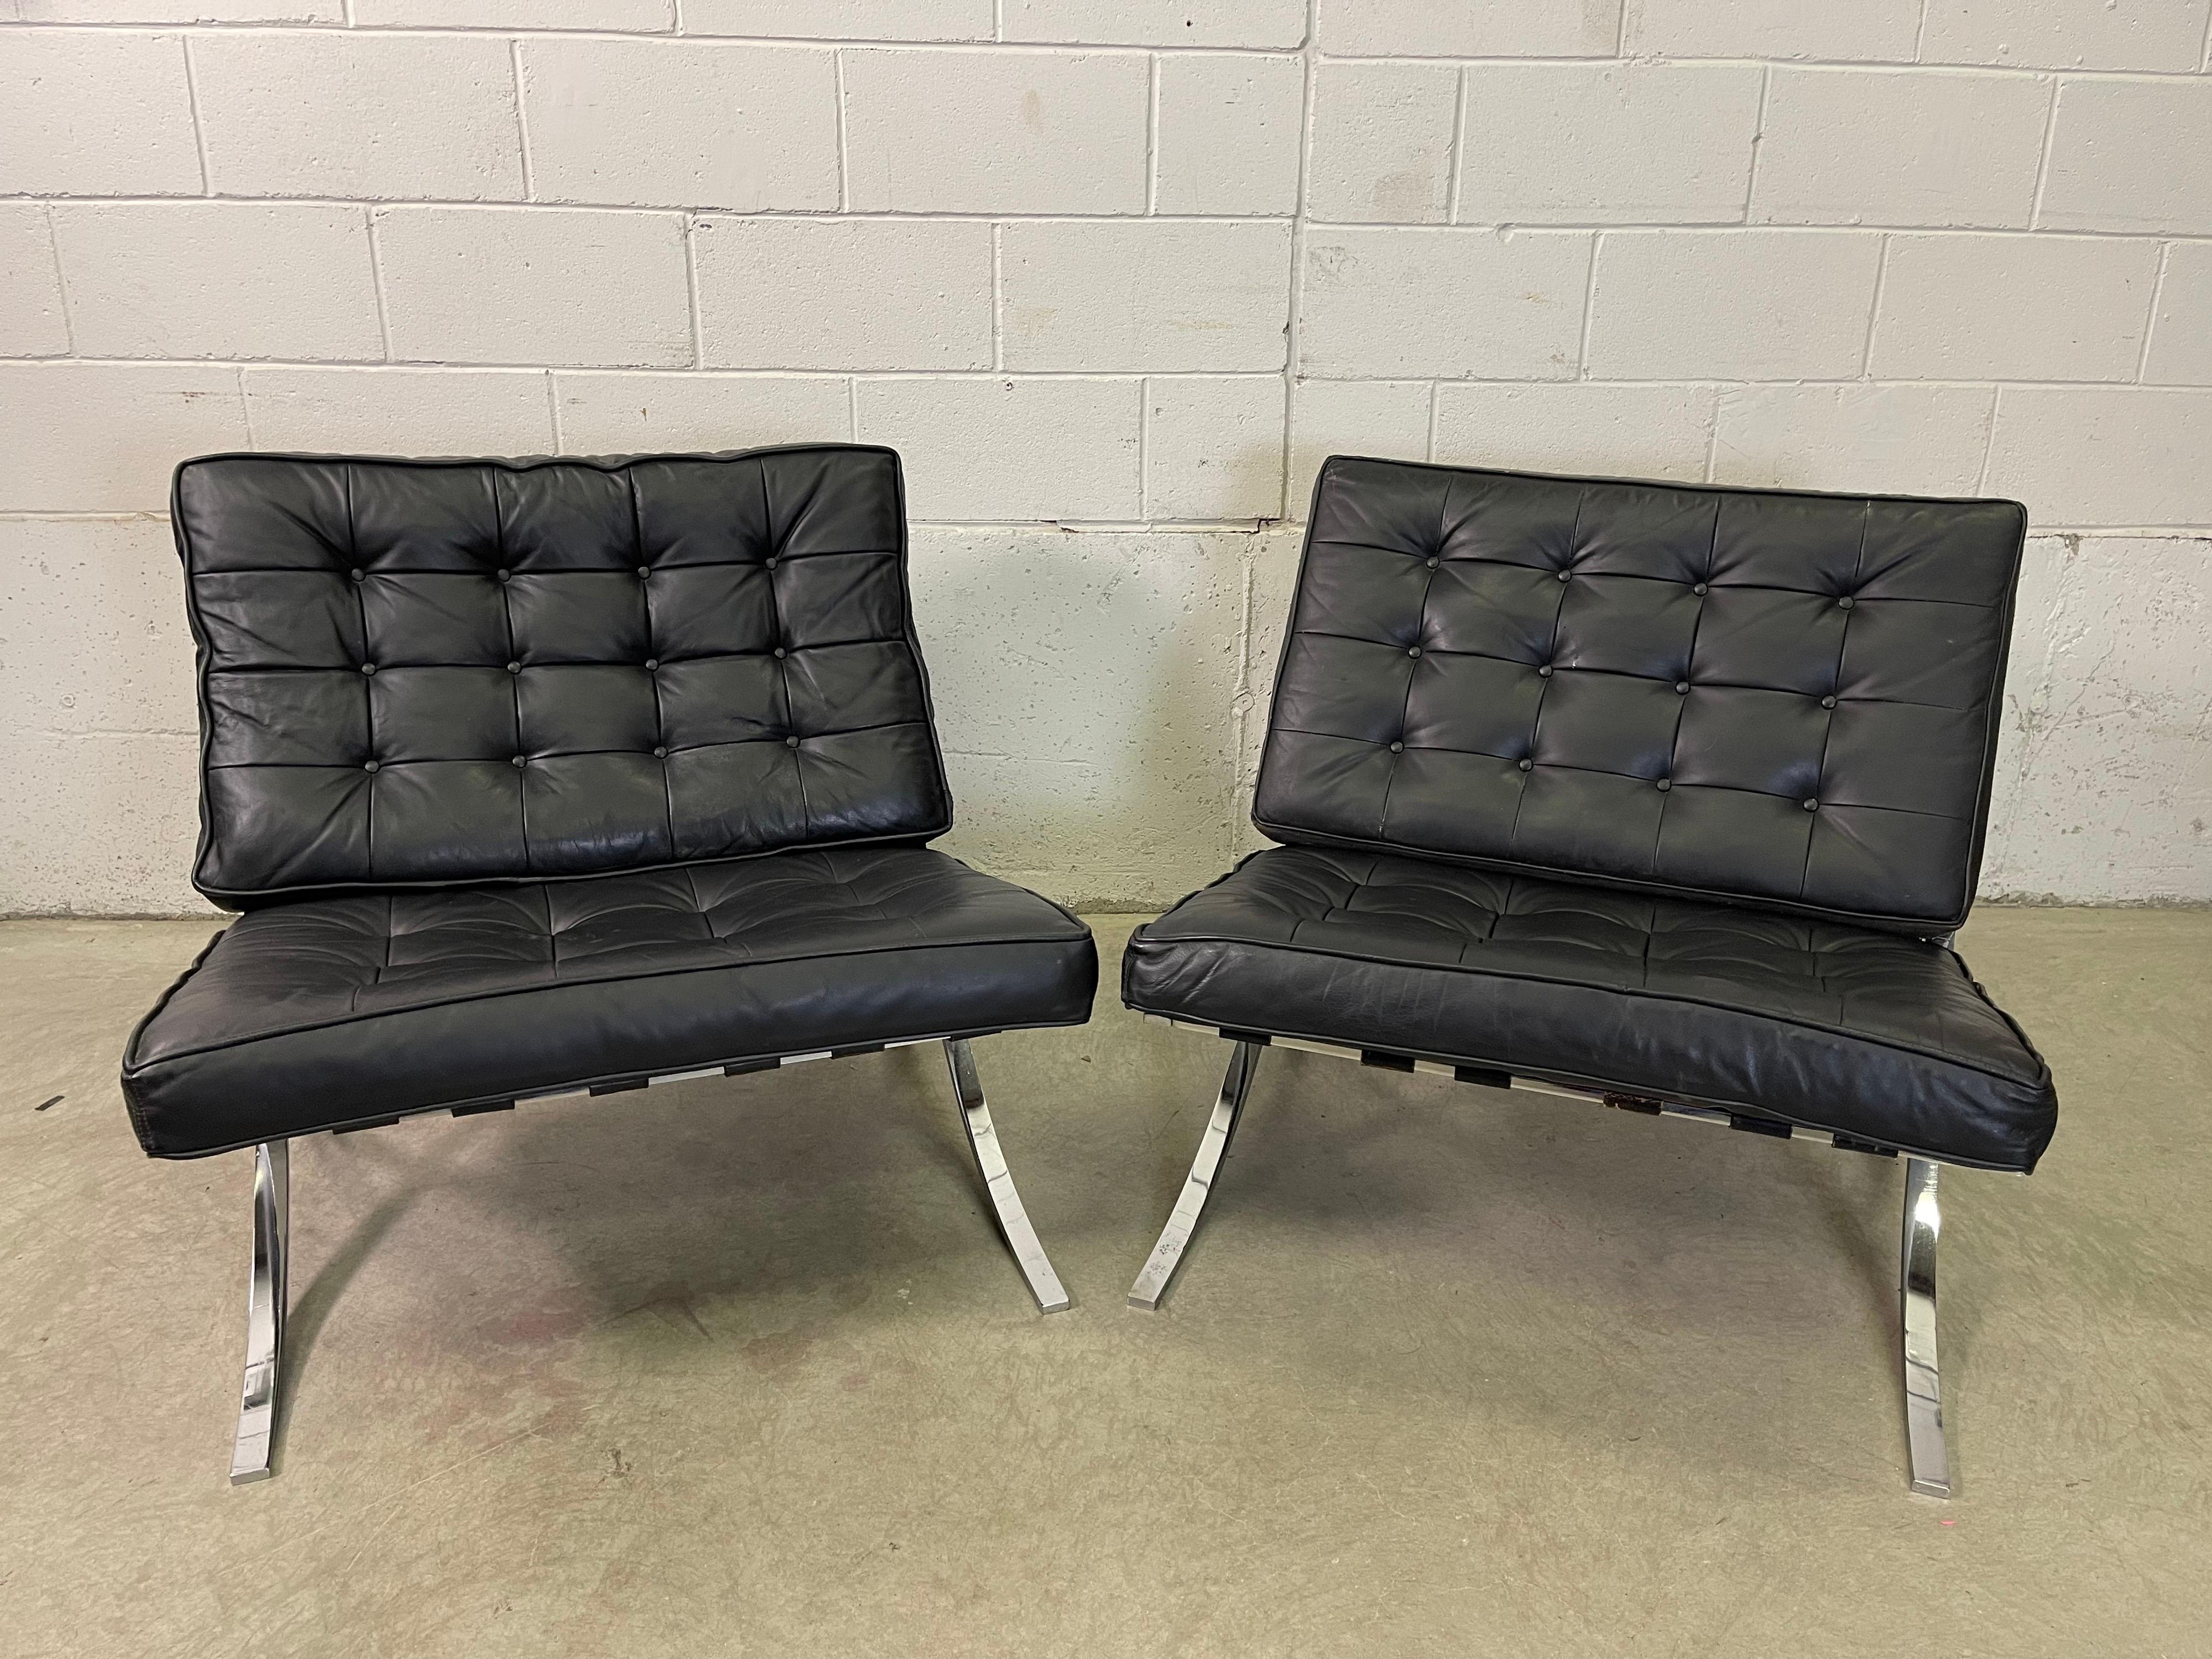 Vintage 1970s Barcelona style lounge chairs designed by Ludwig Mies van der Rohe. These chairs were made in Argentina. The leather seating and the frames are in very good used condition. The straps are all good and tight and the leather has minor